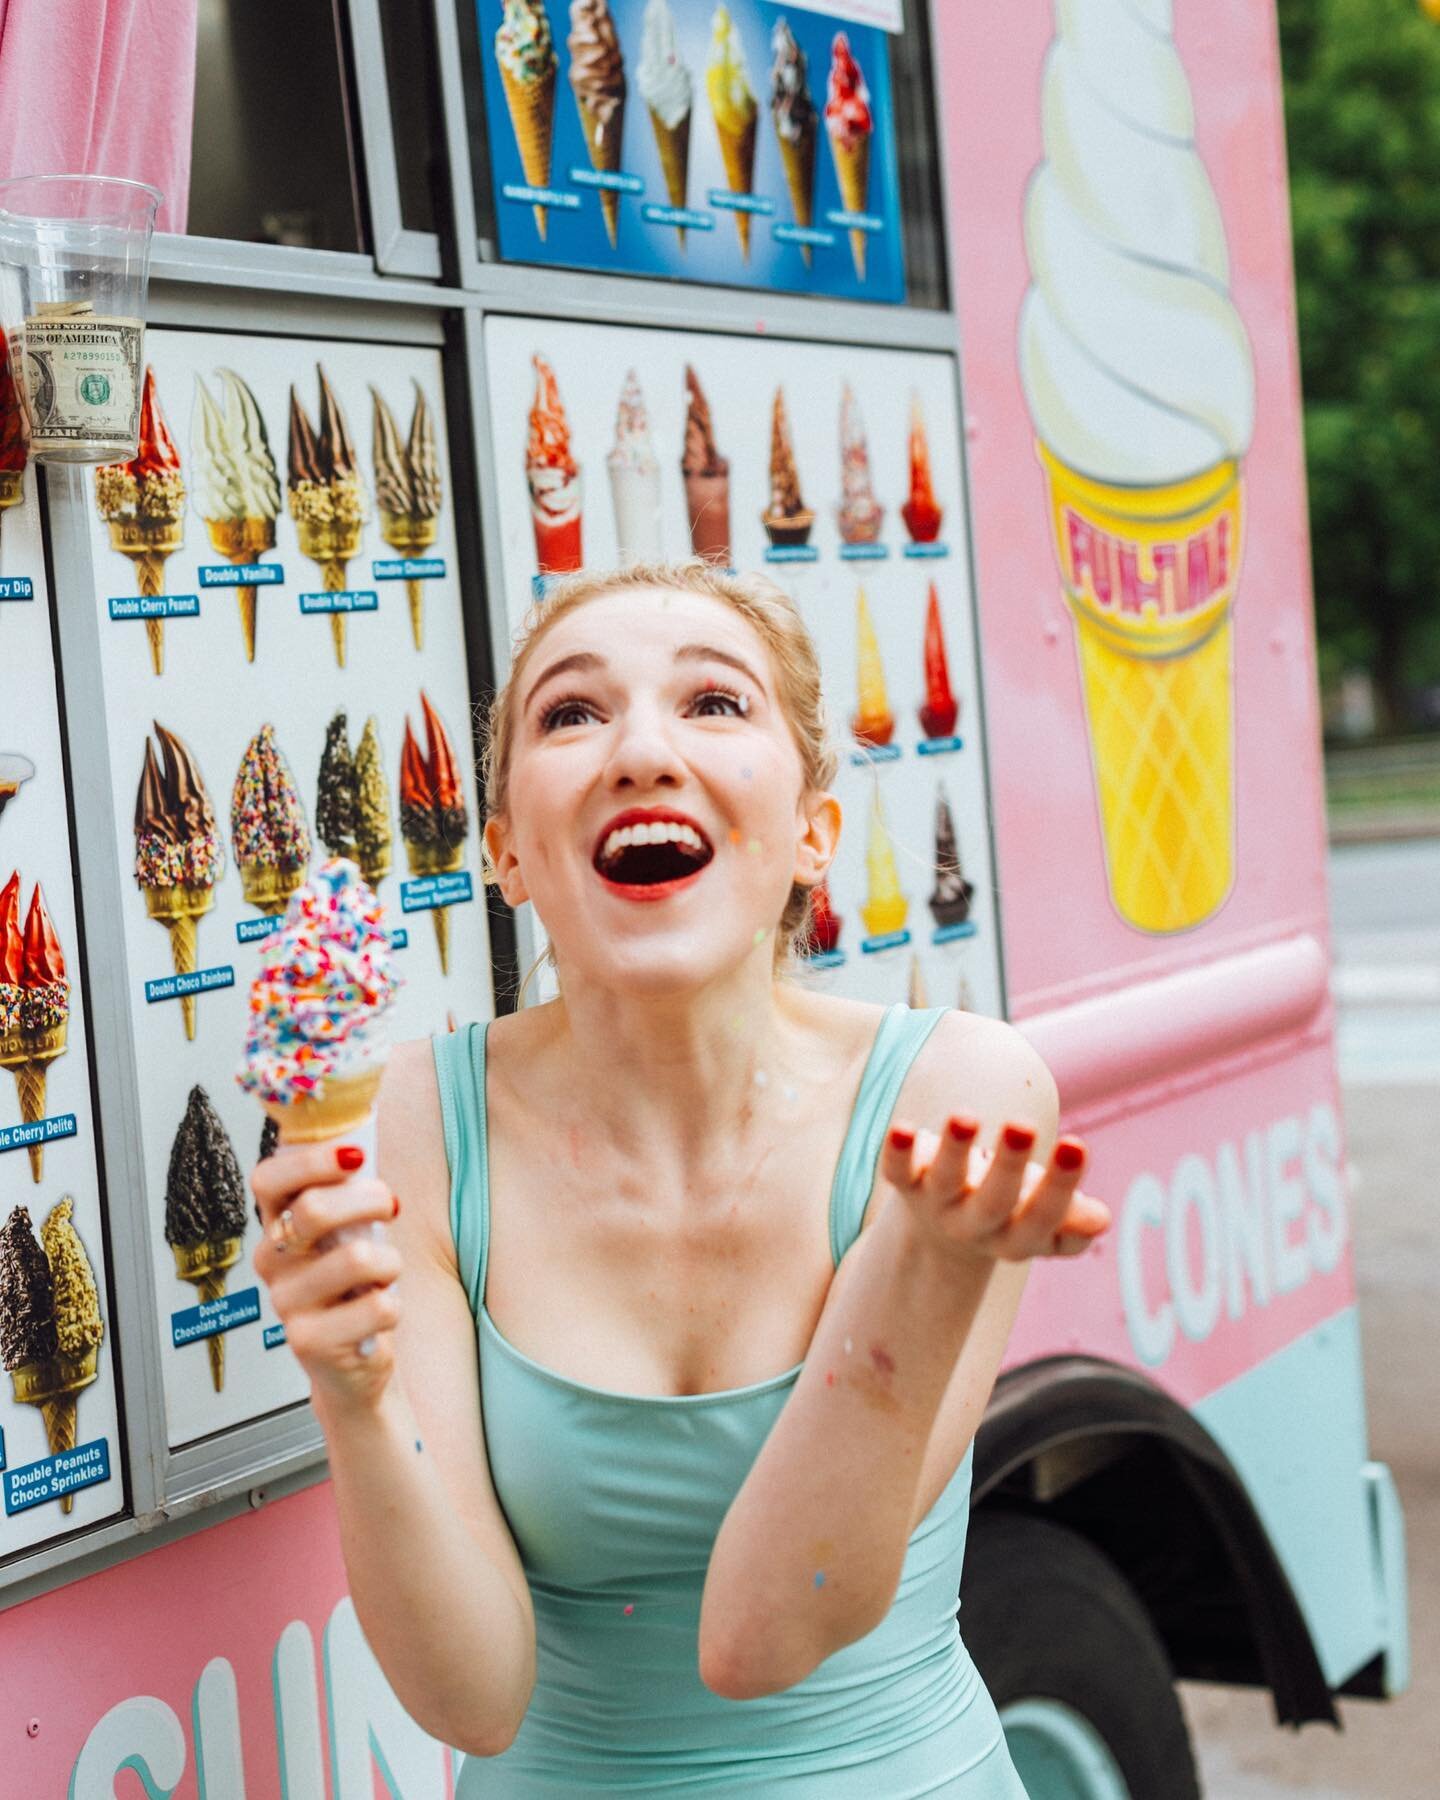 I scream, you scream, we all scream for&hellip; you know the rest 😉🍦
HAPPY NATIONAL ICE CREAM DAY!!! ❤️
Go out and grab a cone. Or pint. Or gallon&hellip; You do you, boo 😘
(Also, shout-out to the guy in the @pinkfrosteetruck for playing along and